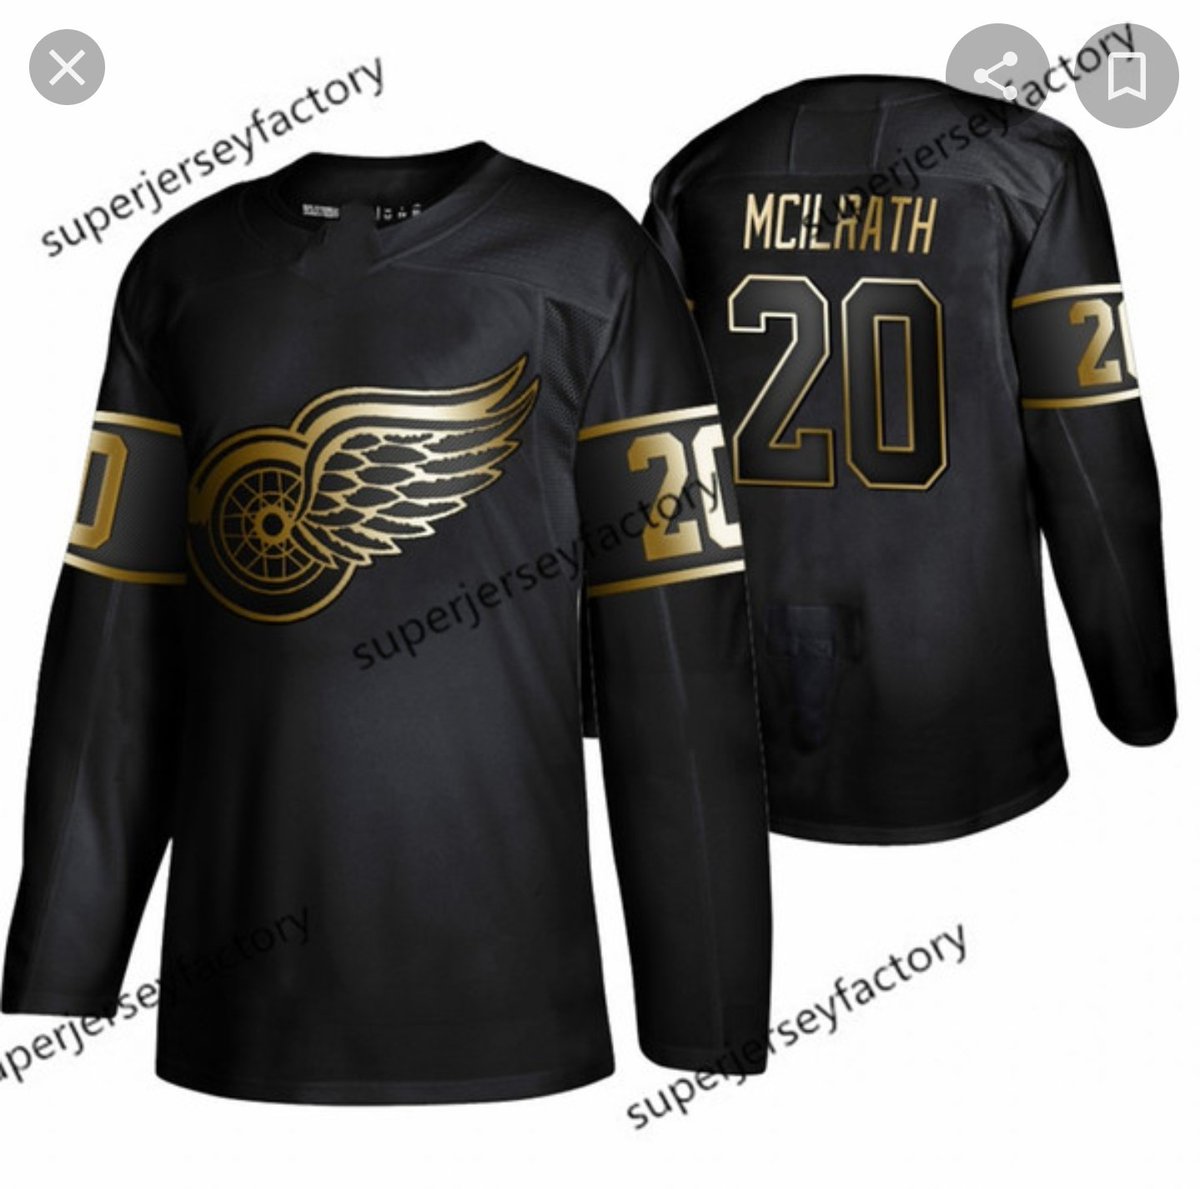 best chinese jersey site 2019